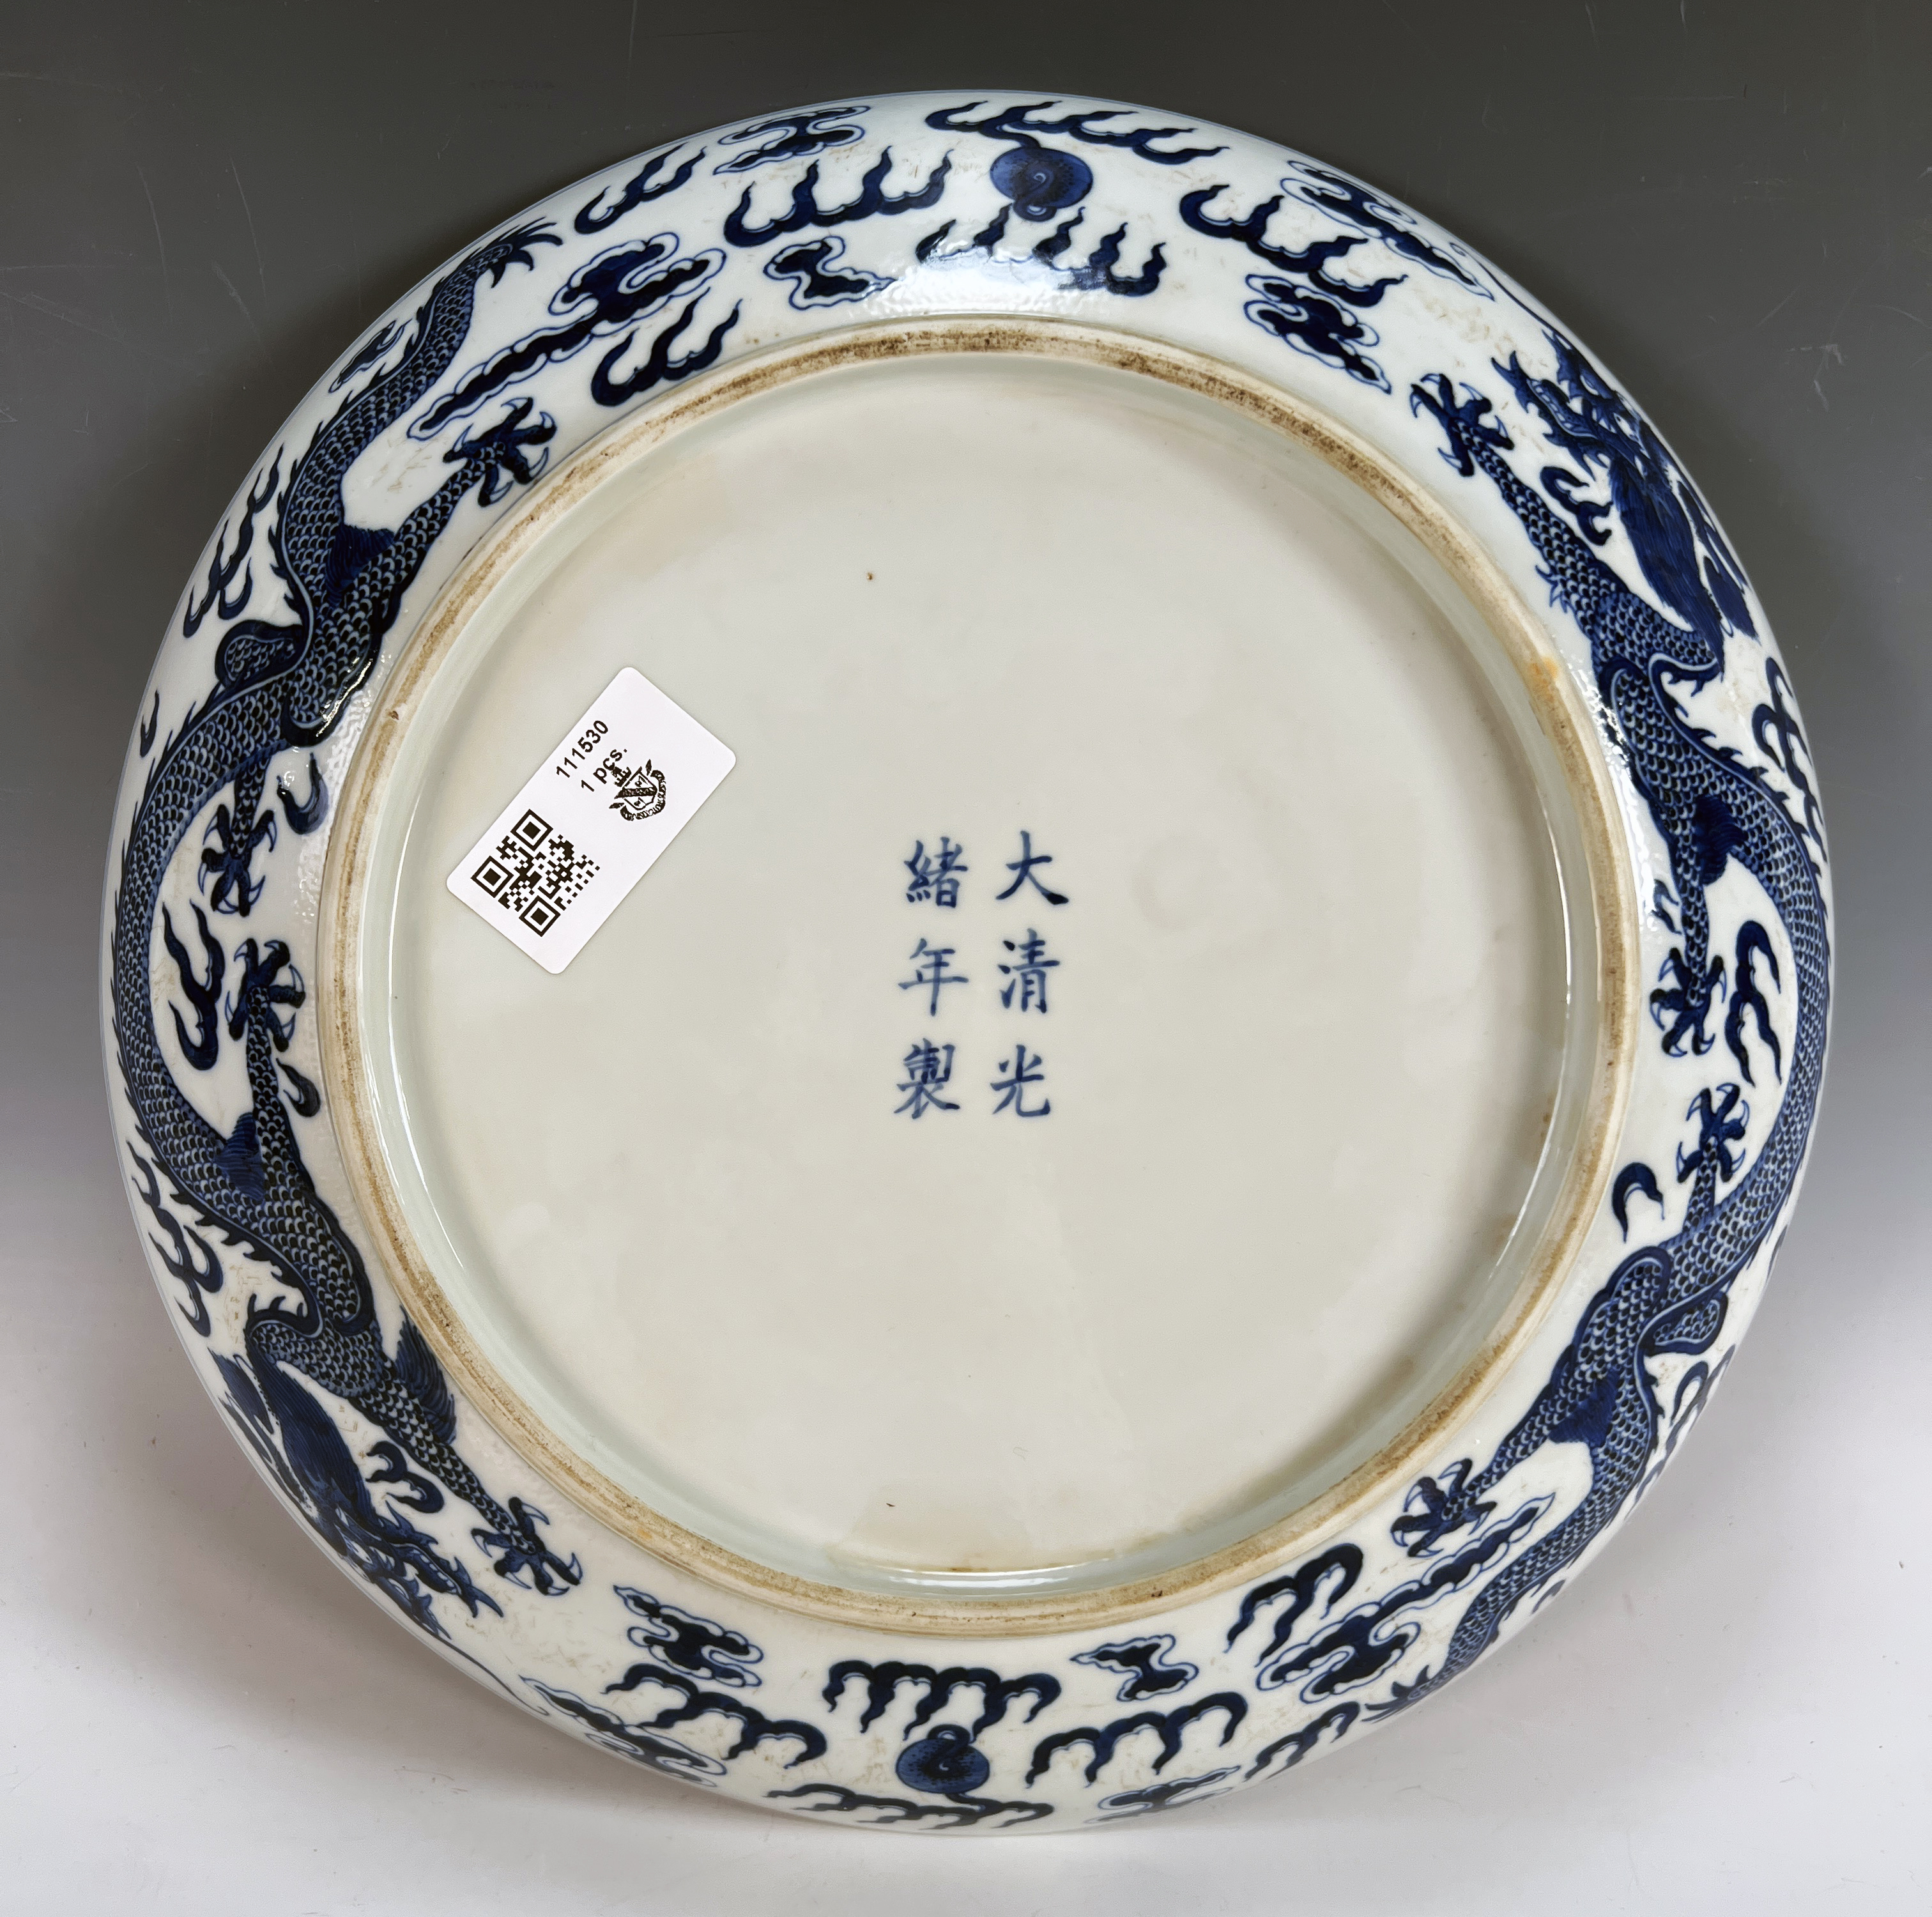 Exquisite Blue & White Chinese Charger Plate With Imperial Dragon Motif image 3